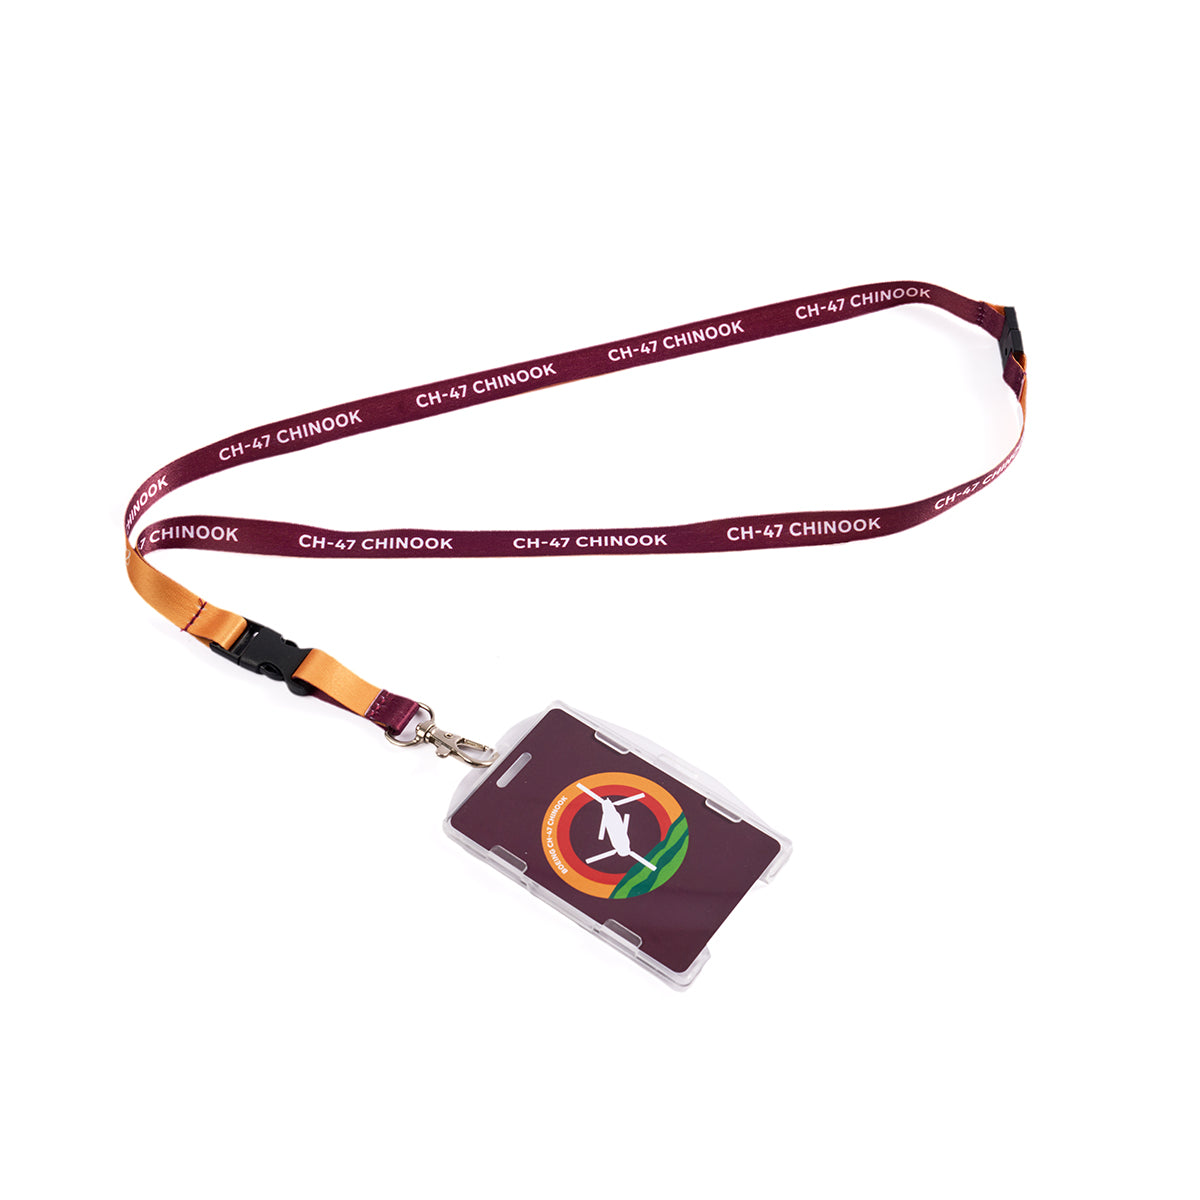 Full product image of the lanyard in red and orange. Boeing CH-47 Chinook Skyward sublimation print. Full printed PVC card with Boeing CH-47 Chinook Skyward roundel design.